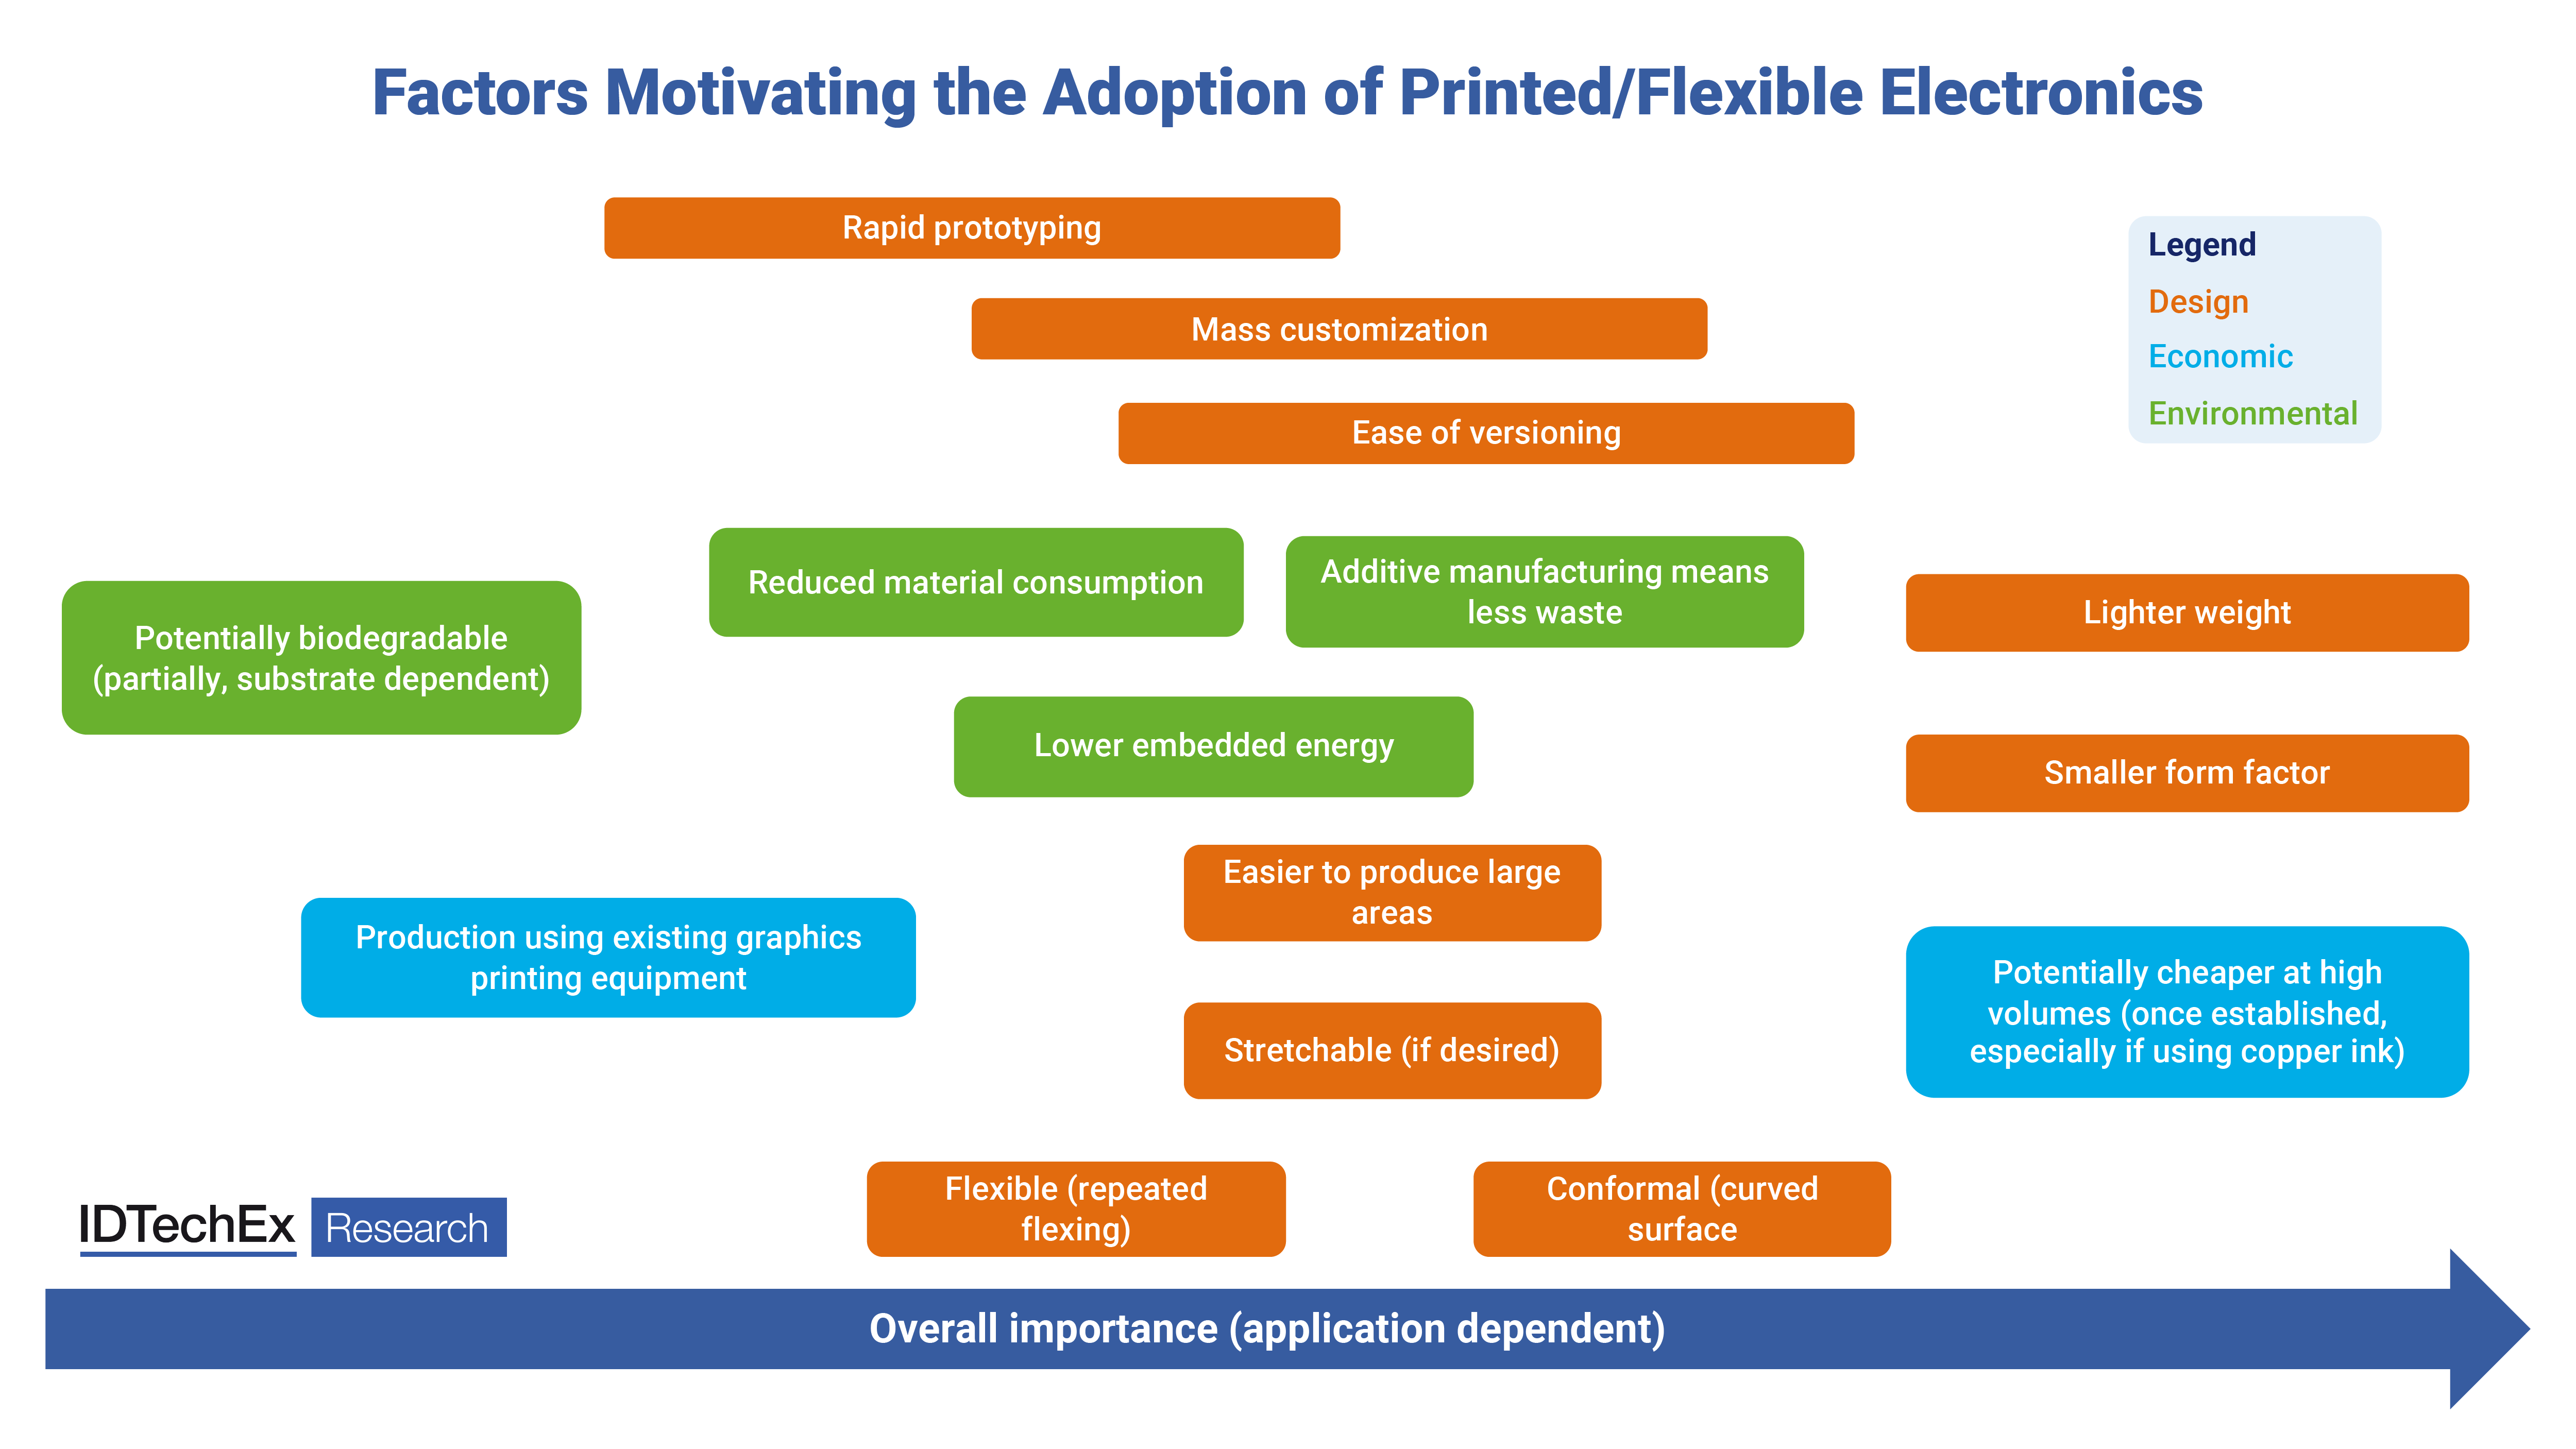 Factors motivating the adoption of printed and flexible electronics. Source: IDTechEx